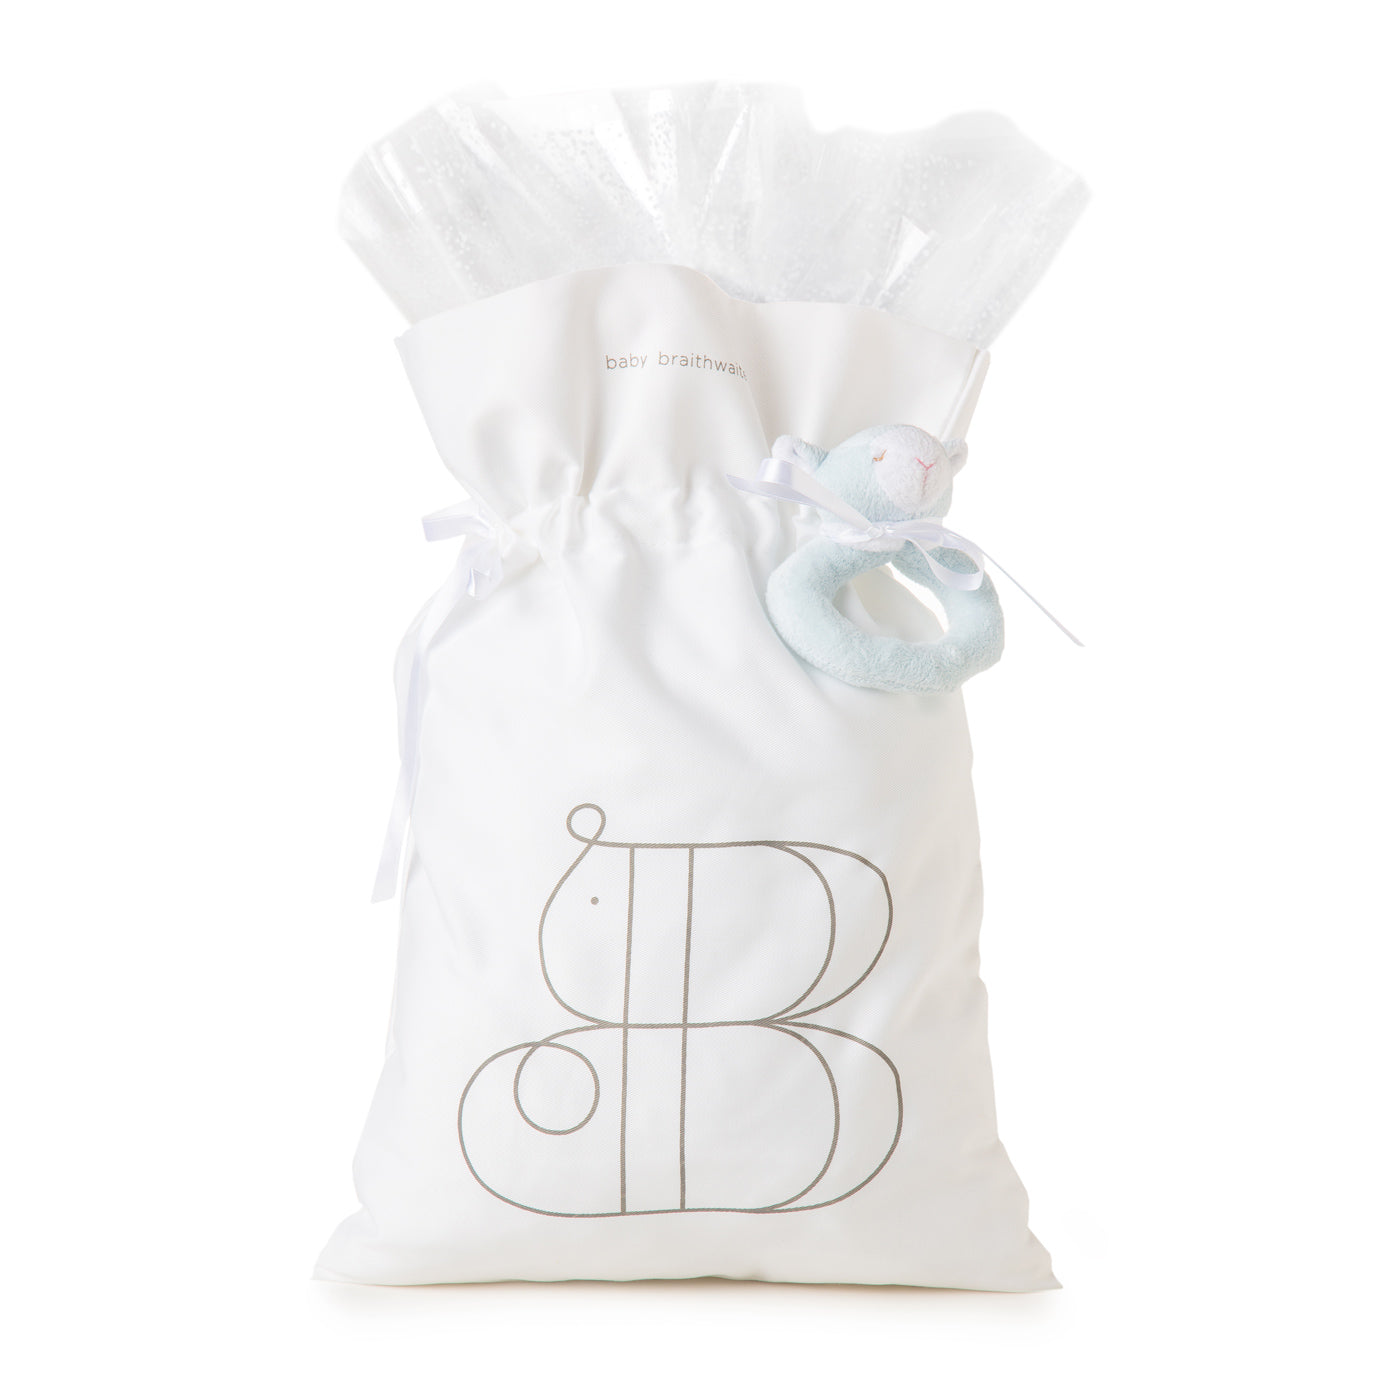 Gift Packaging + Blue Rattle